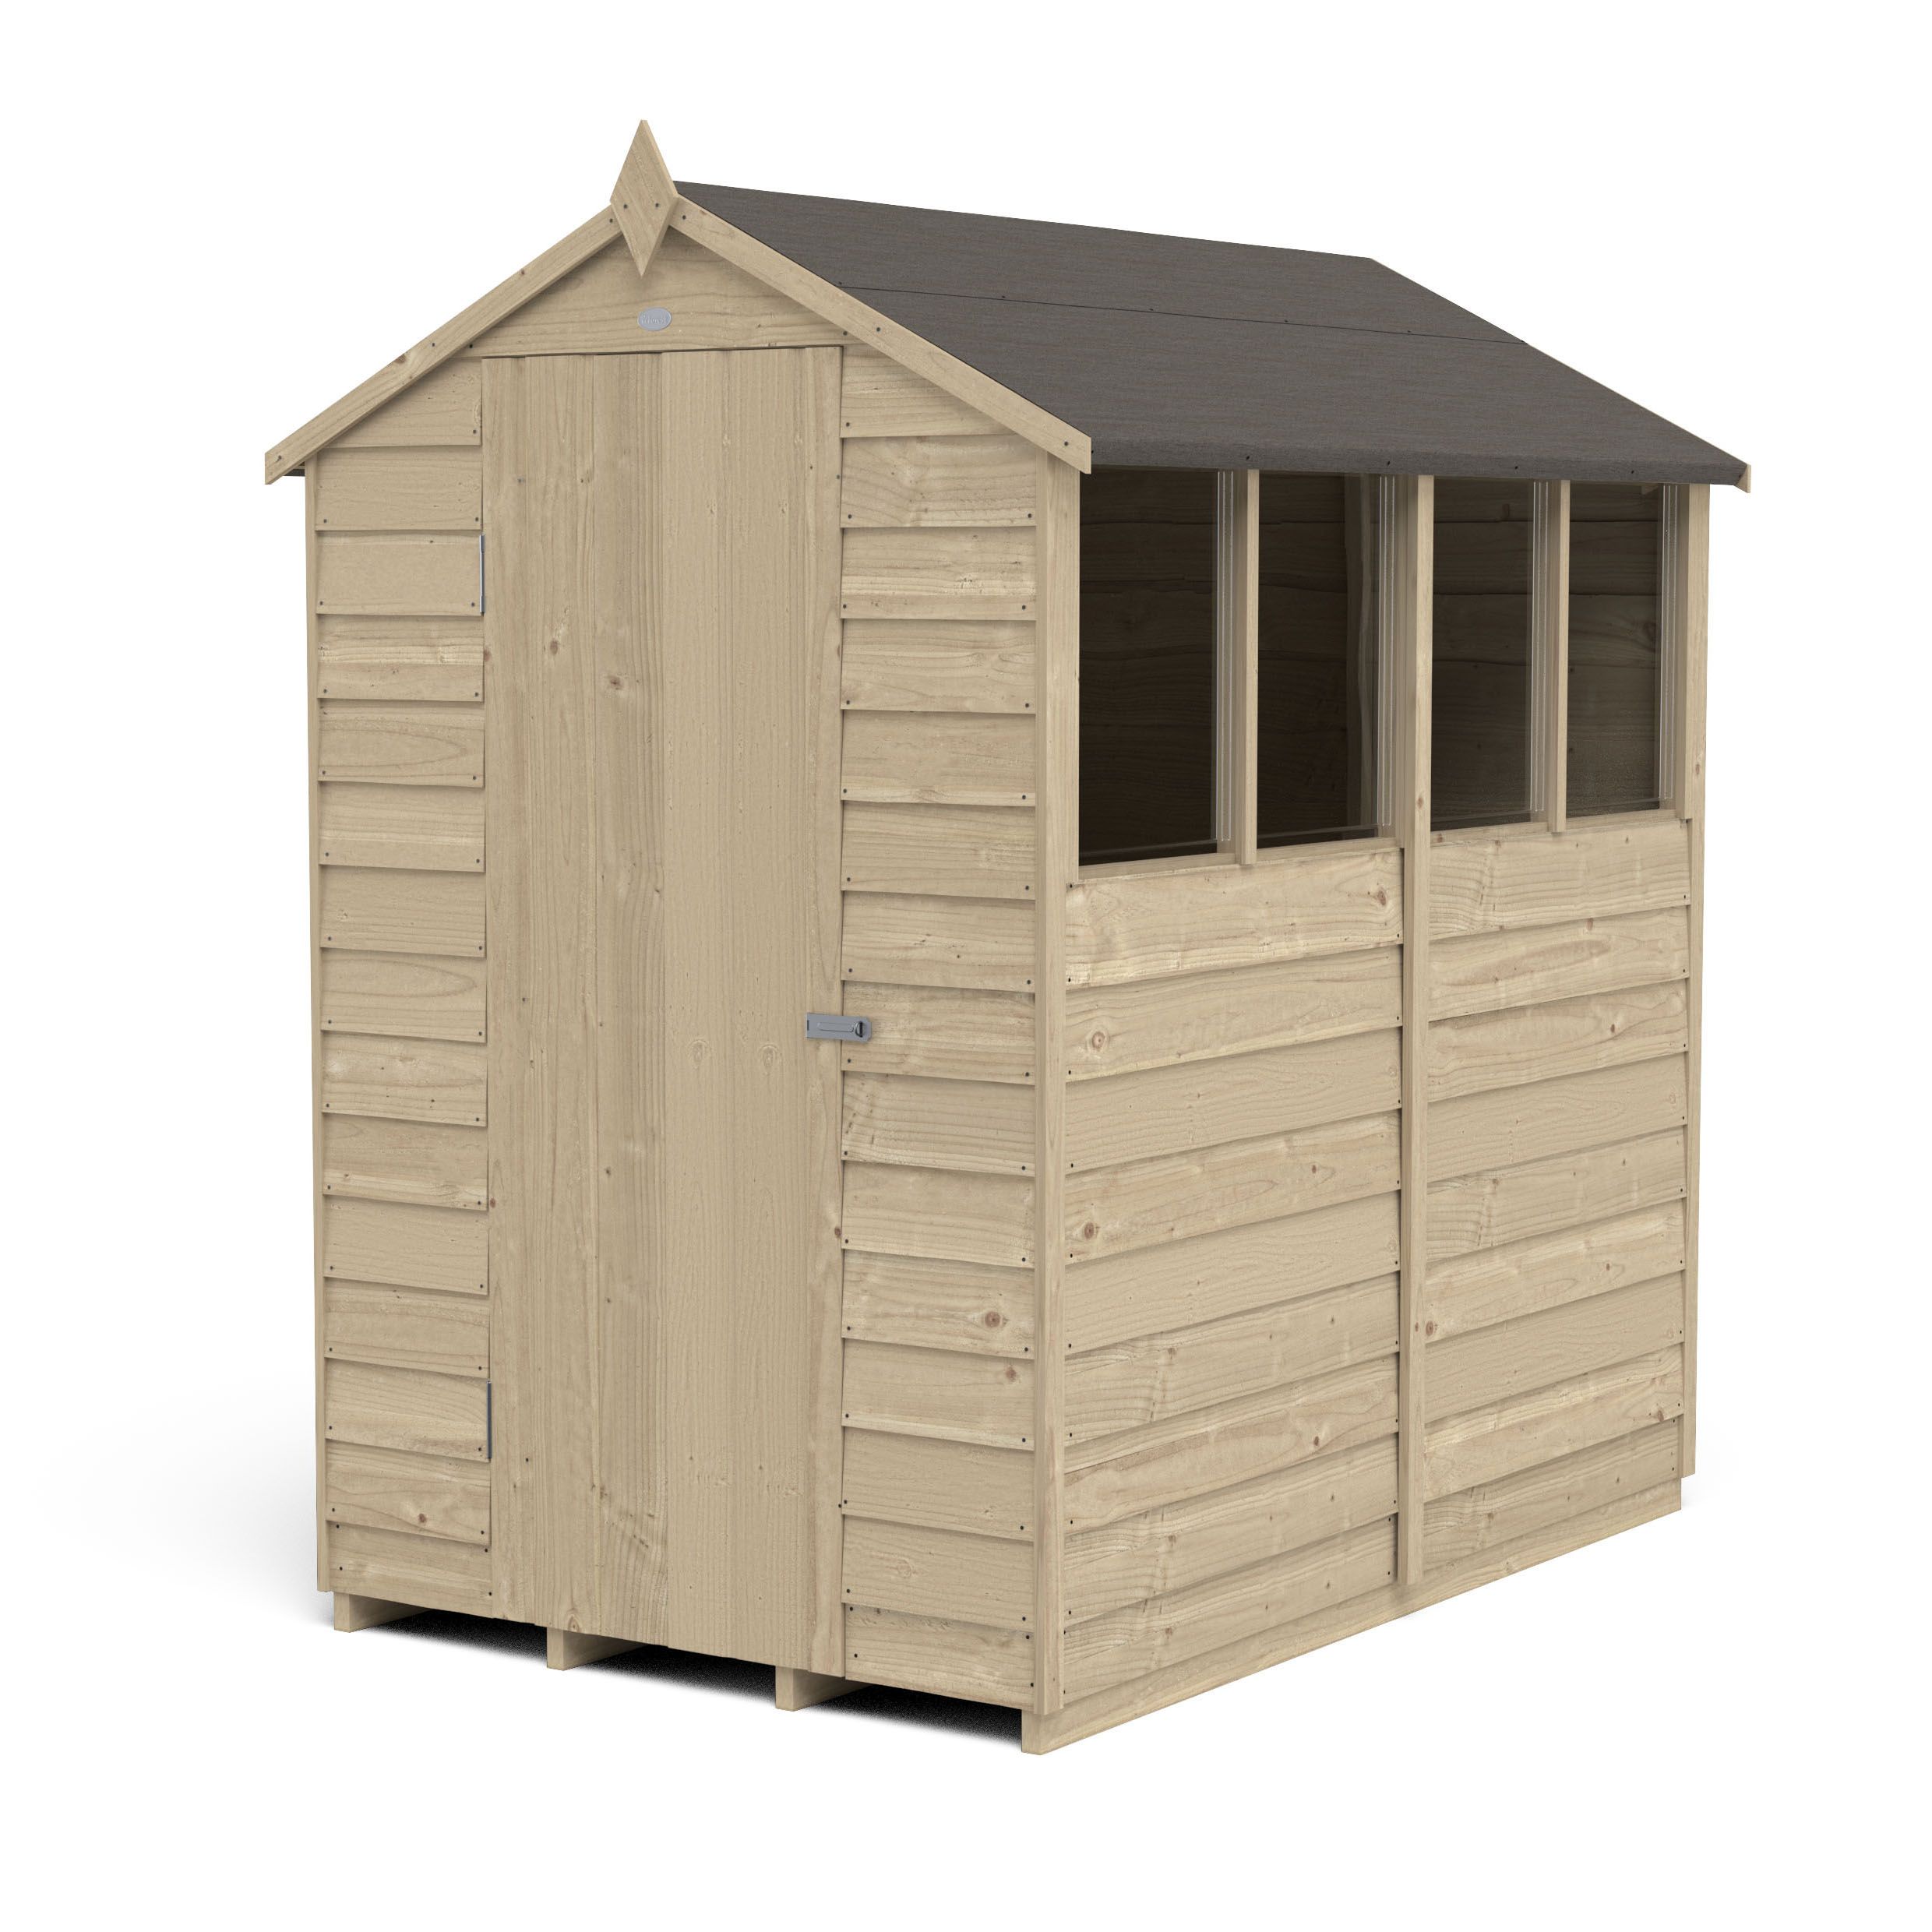 Forest Garden 6x4 ft Apex Wooden Shed with floor & 4 windows (Base included) - Assembly service included